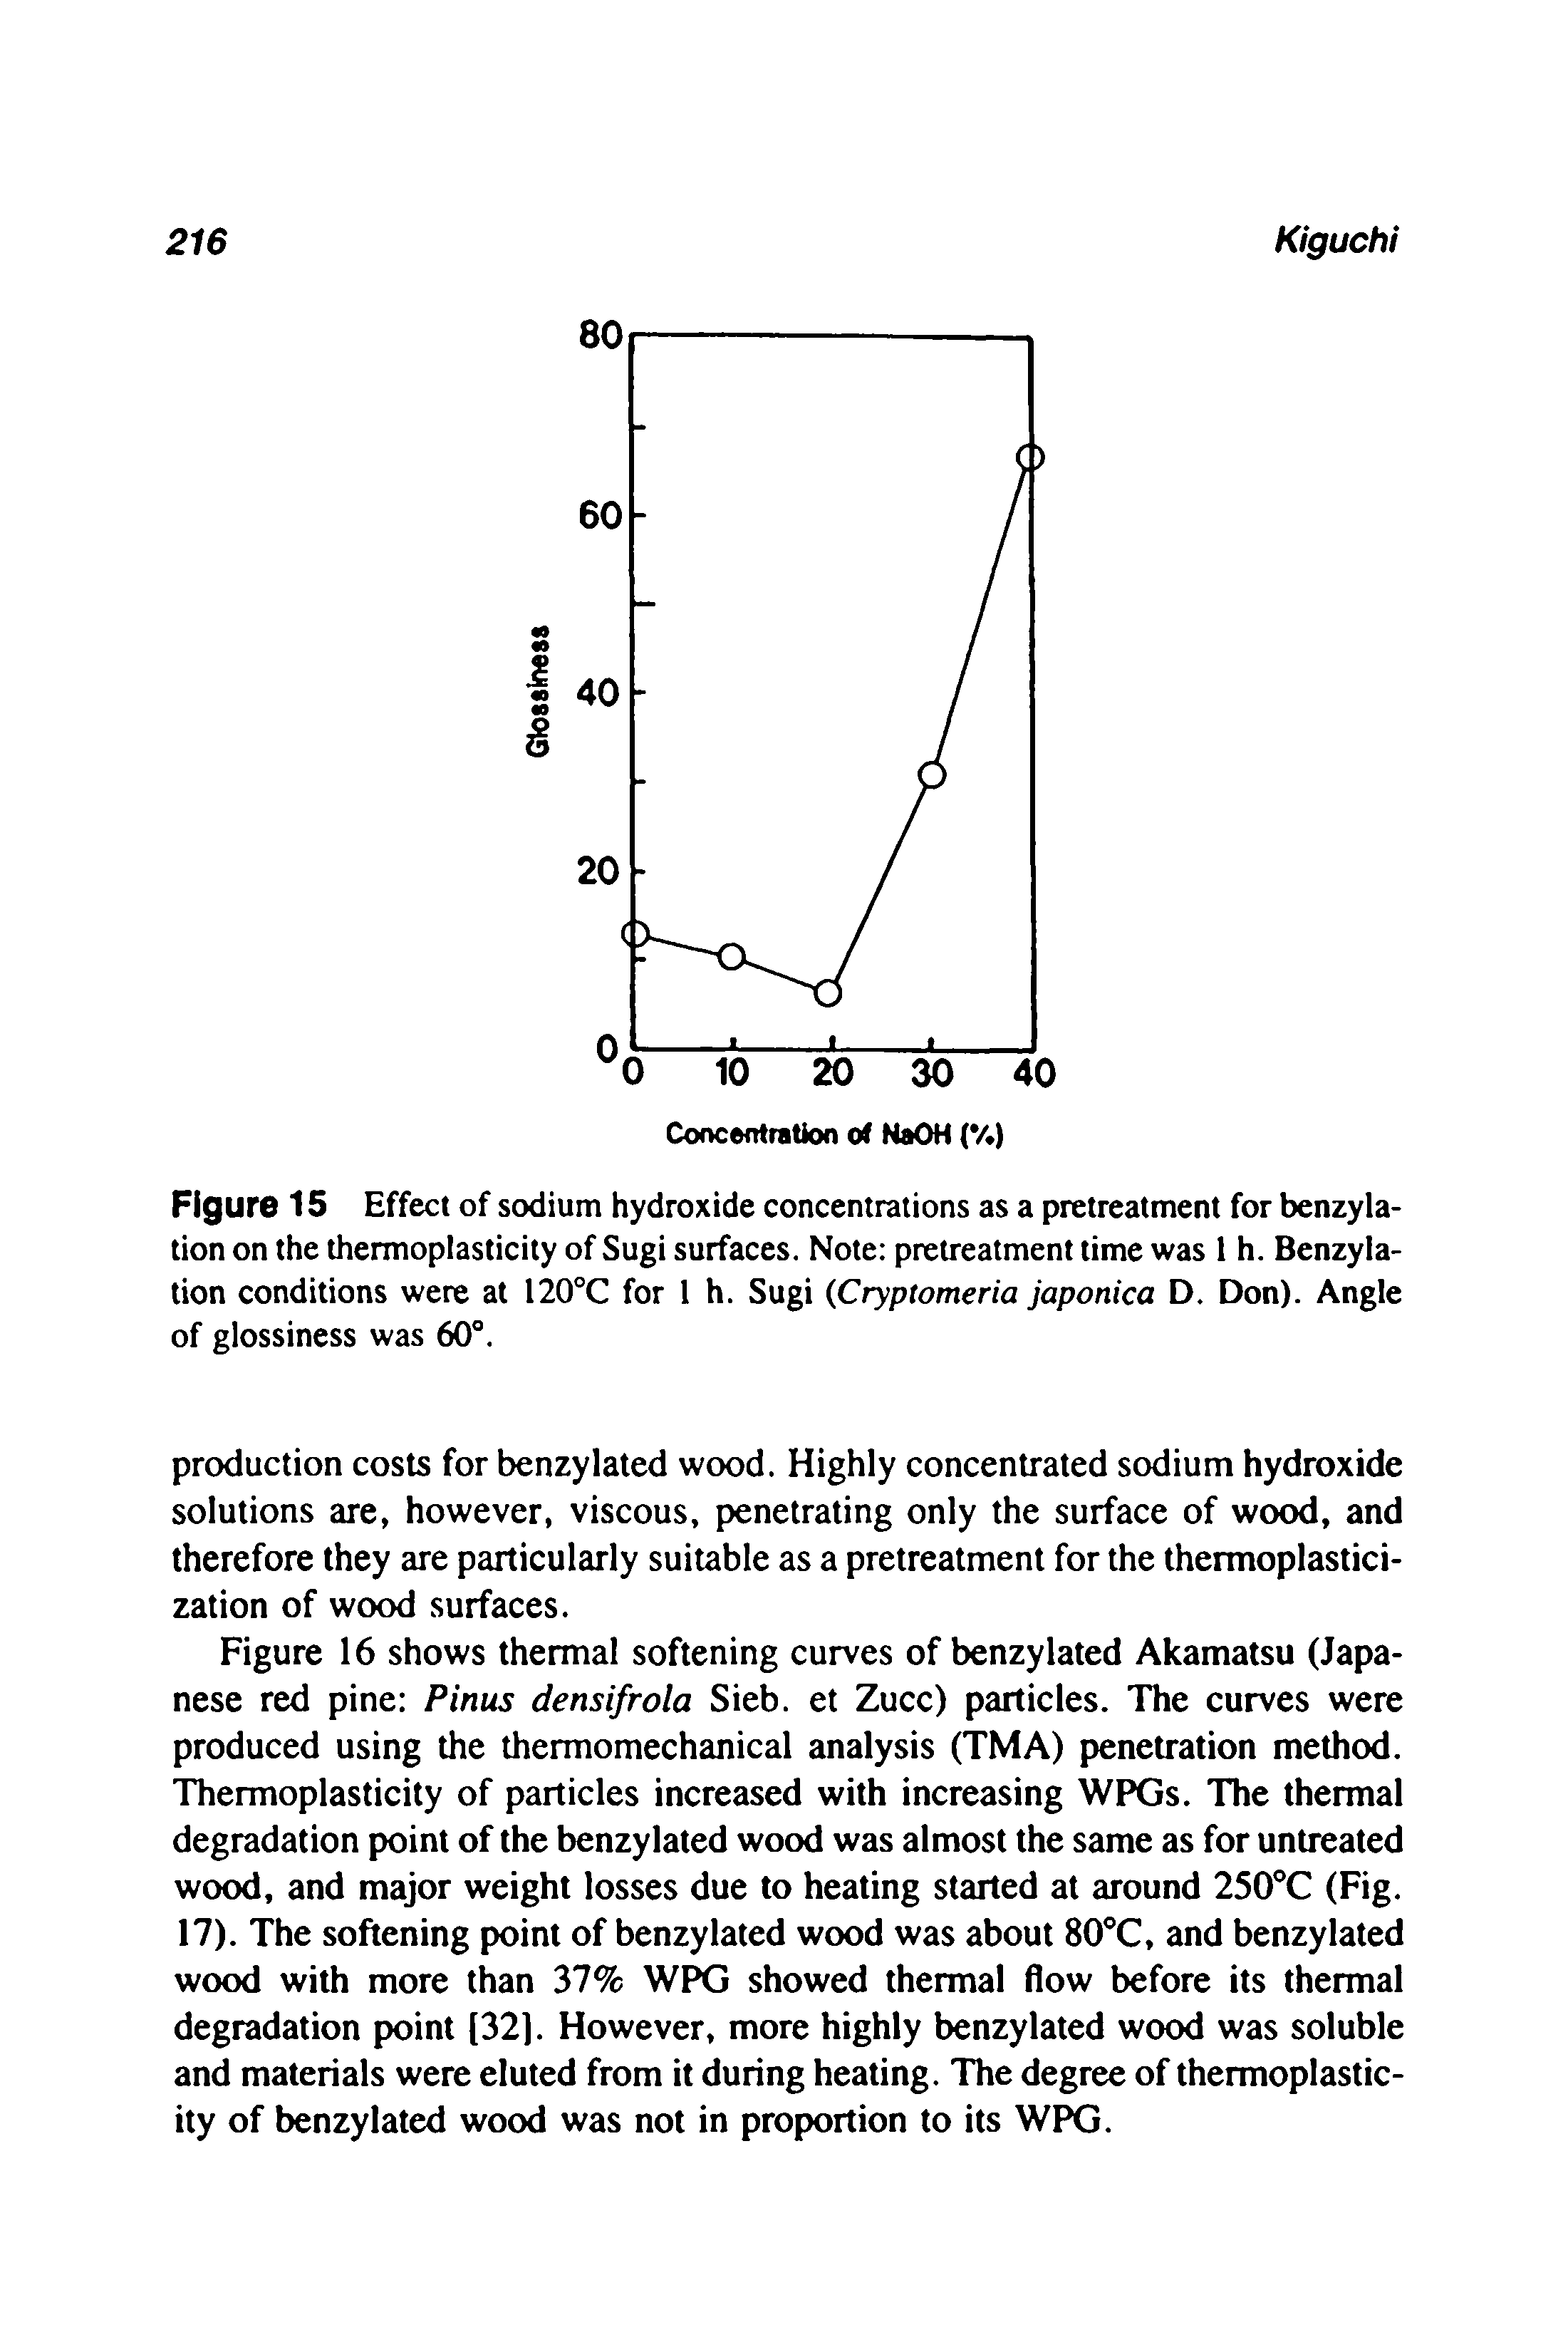 Figure 15 Effect of sodium hydroxide concentrations as a pretreatment for benzyla-tion on the thermoplasticity of Sugi surfaces. Note pretreatment time was 1 h. Benzyla-tion conditions were at 120°C for 1 h. Sugi Cryptomeria japonica D. Don). Angle of glossiness was 60°.